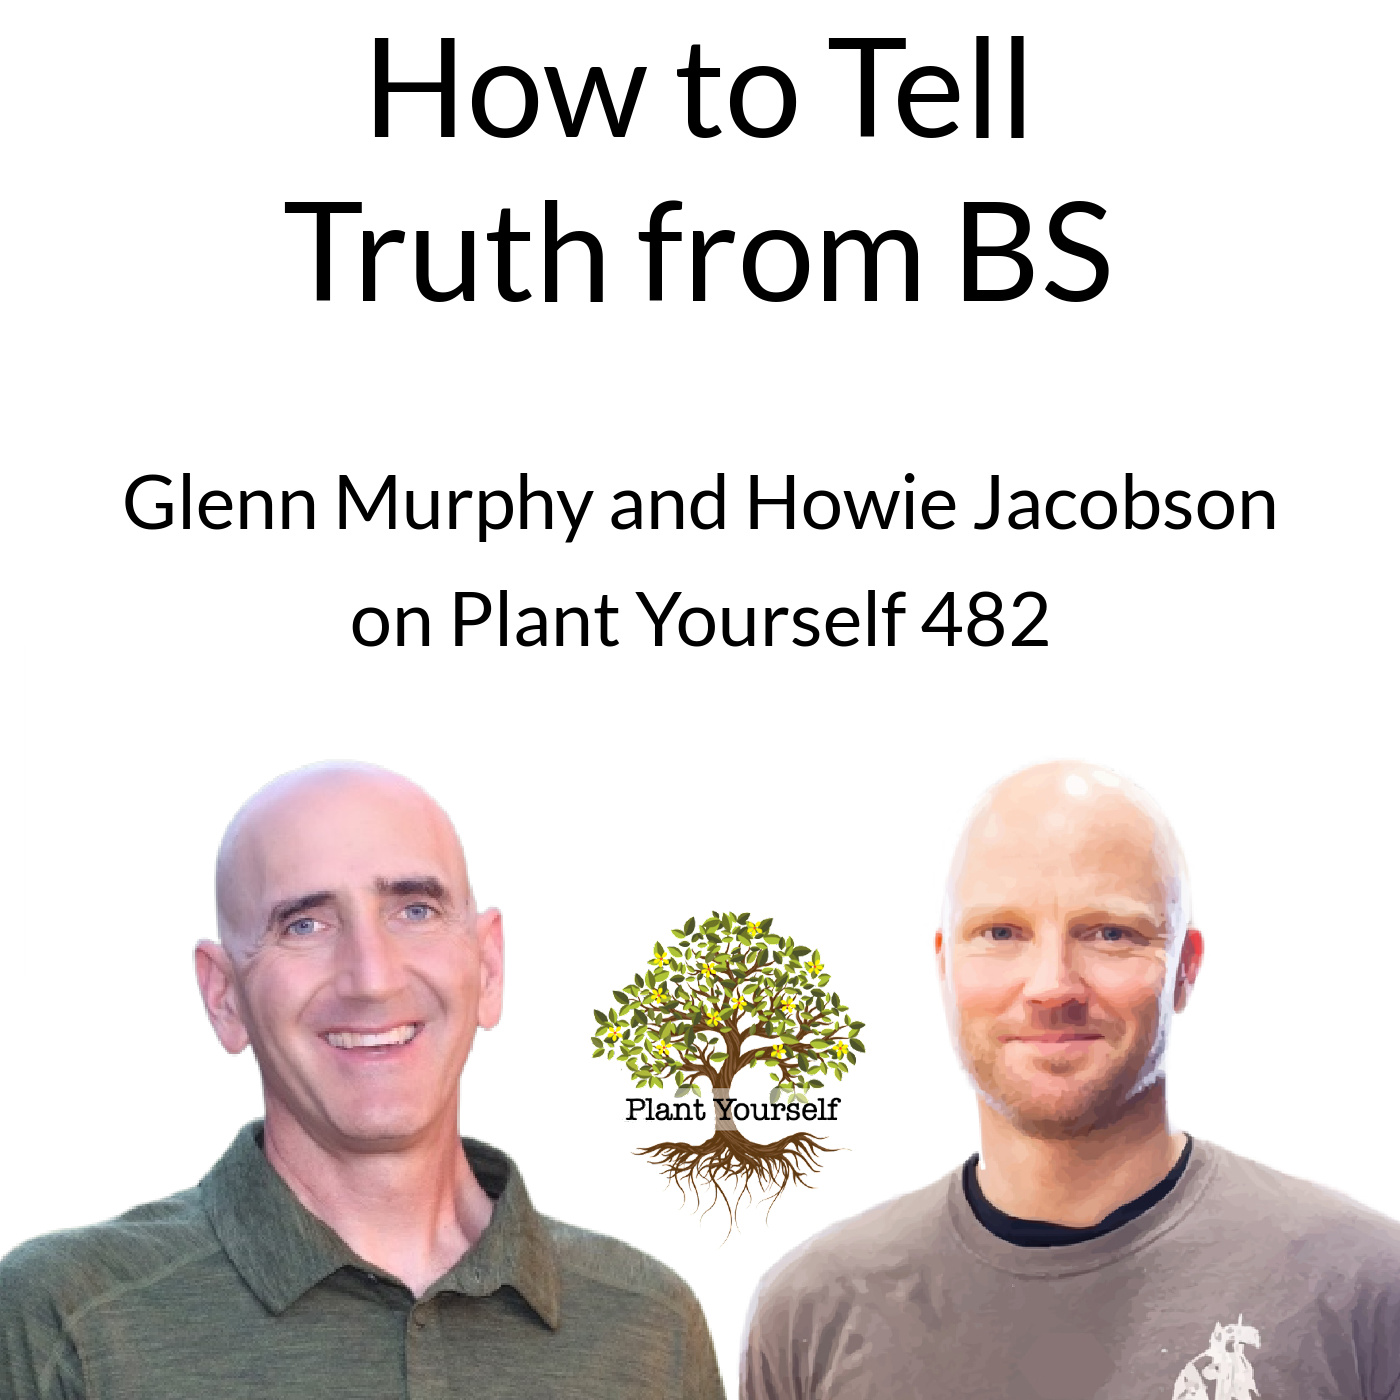 How to Tell Truth from BS: Glenn Murphy on PYP 482